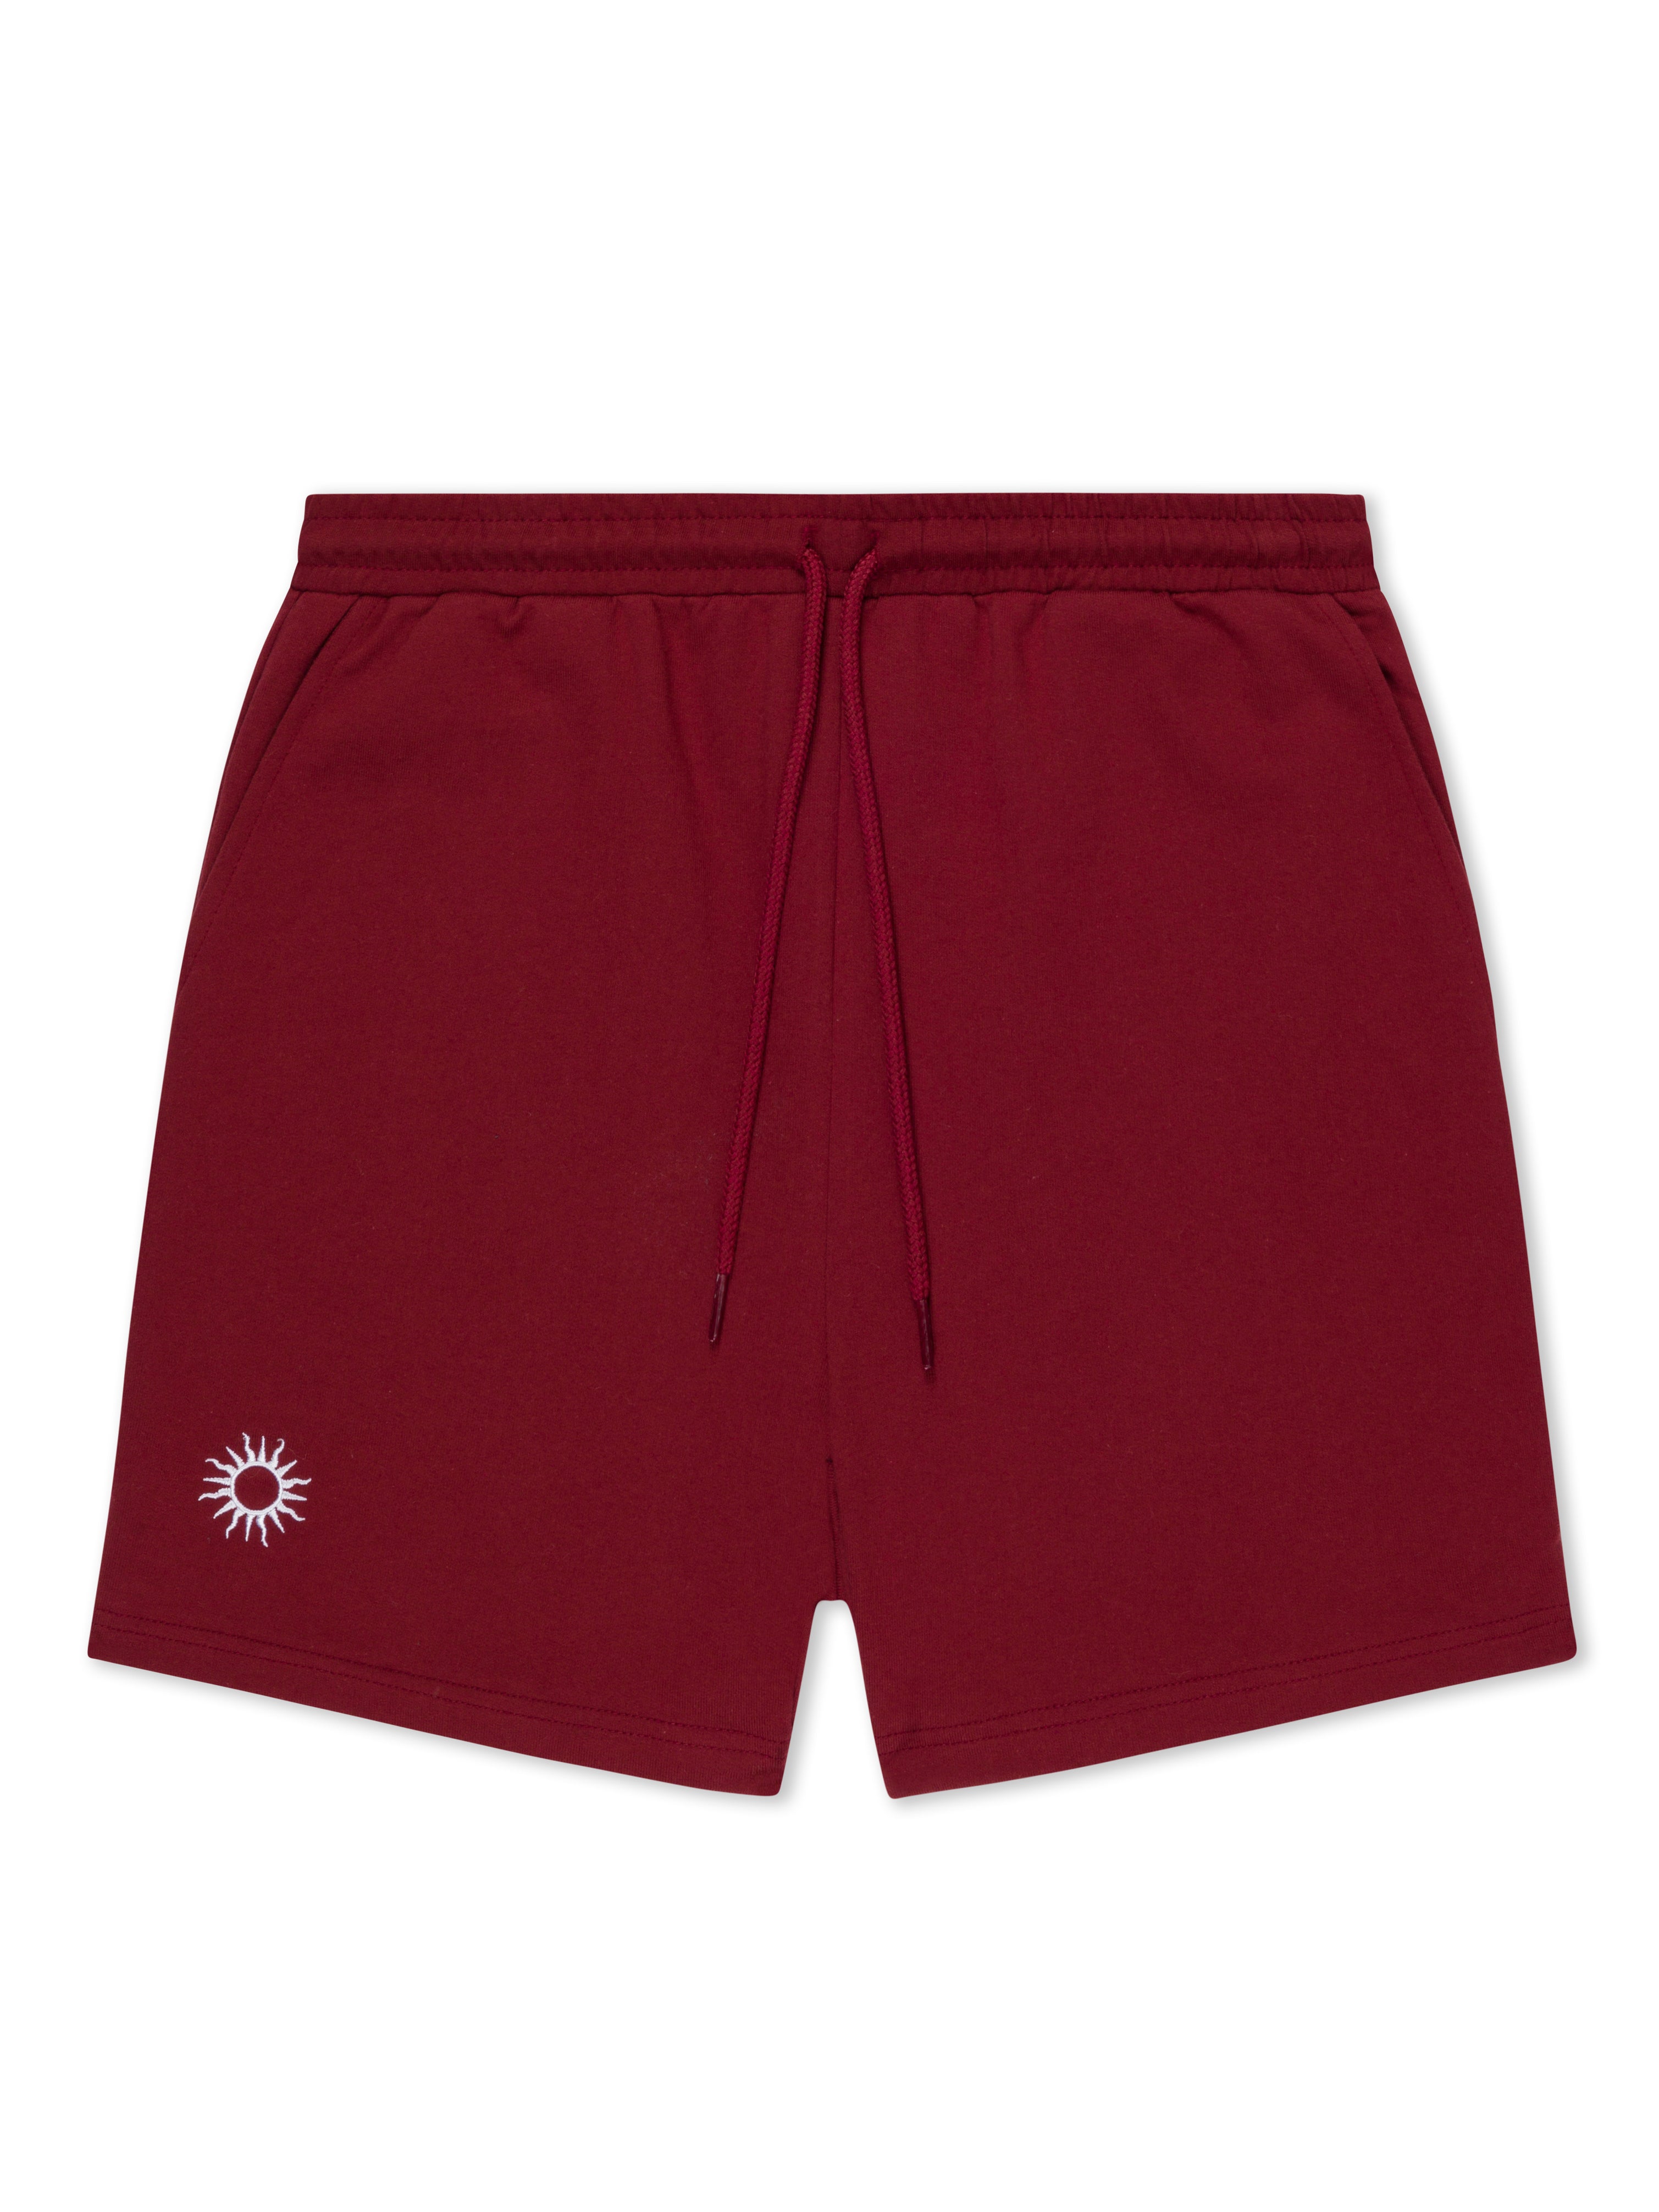 red cotton training shorts with white sun embroidered on left leg